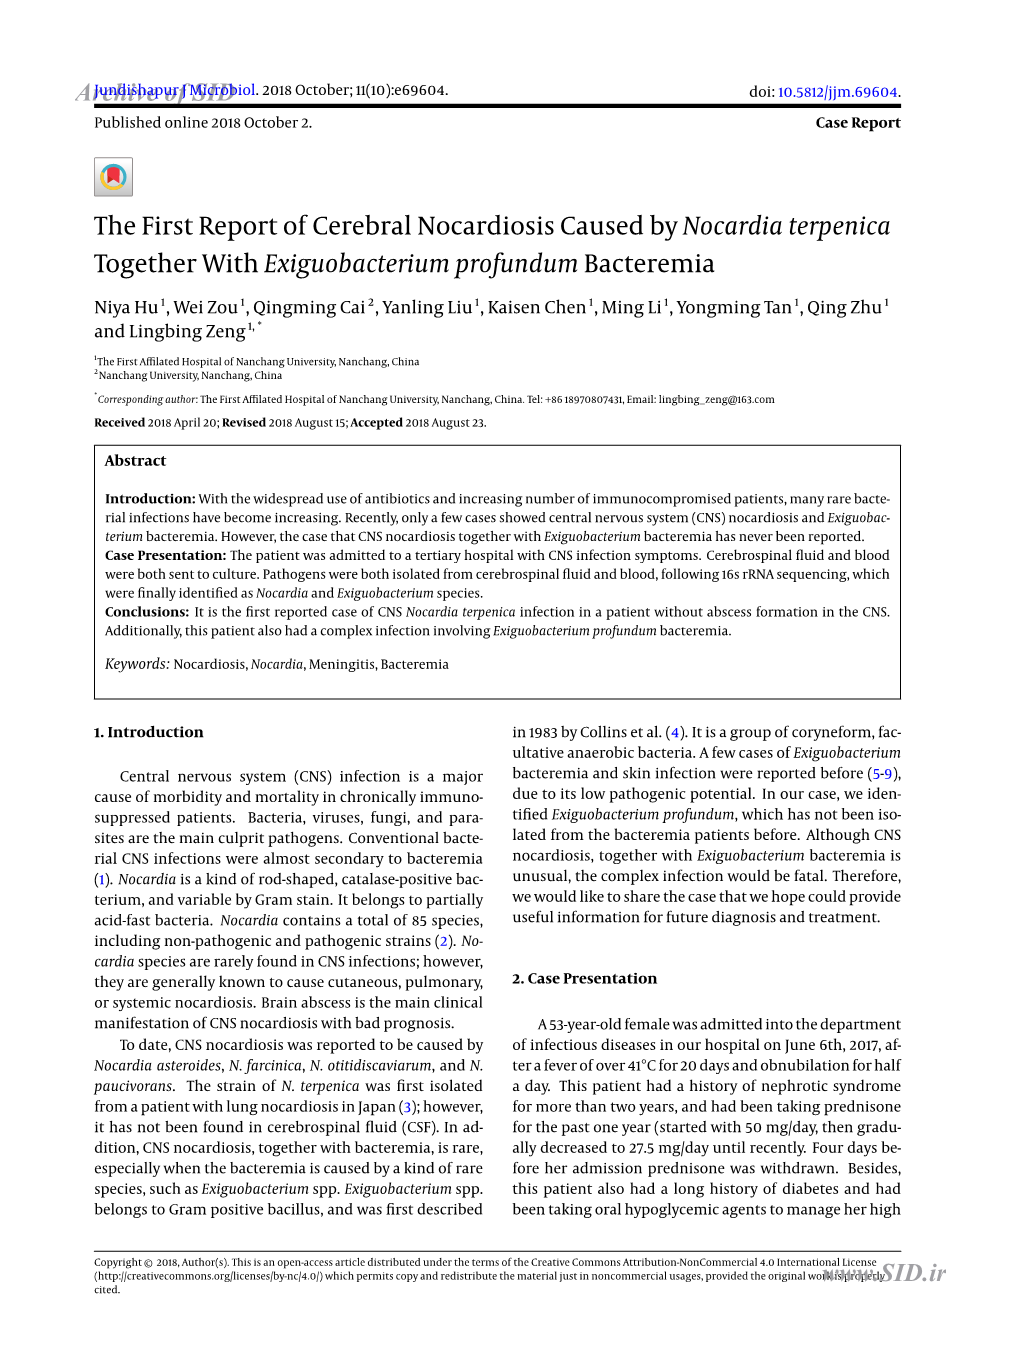 The First Report of Cerebral Nocardiosis Caused by Nocardia Terpenica Together with Exiguobacterium Profundum Bacteremia